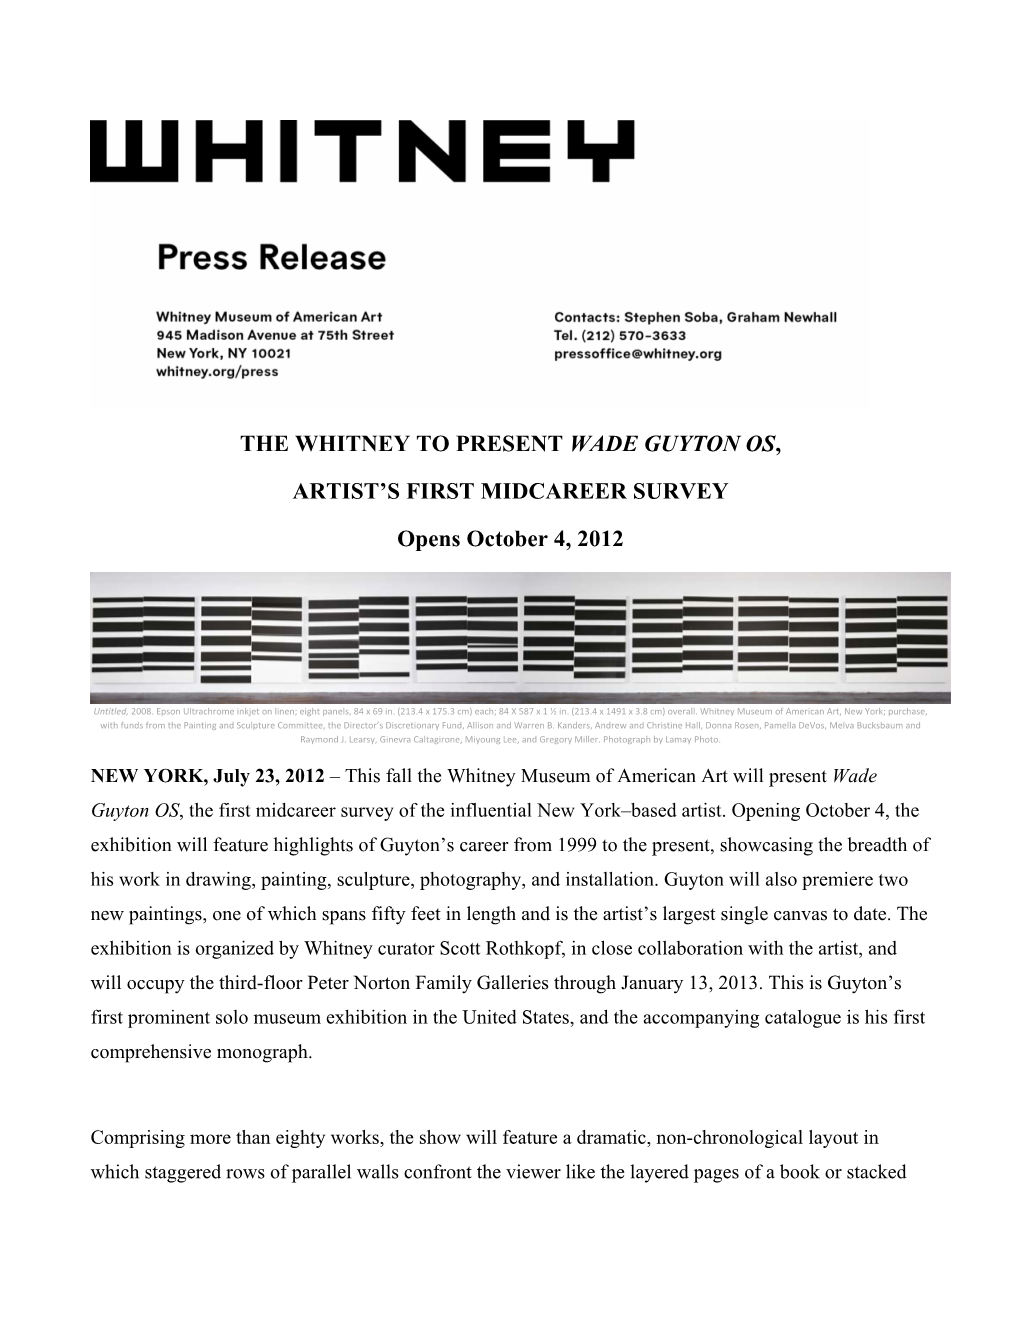 The Whitney to Present Wade Guyton Os, Artist's First